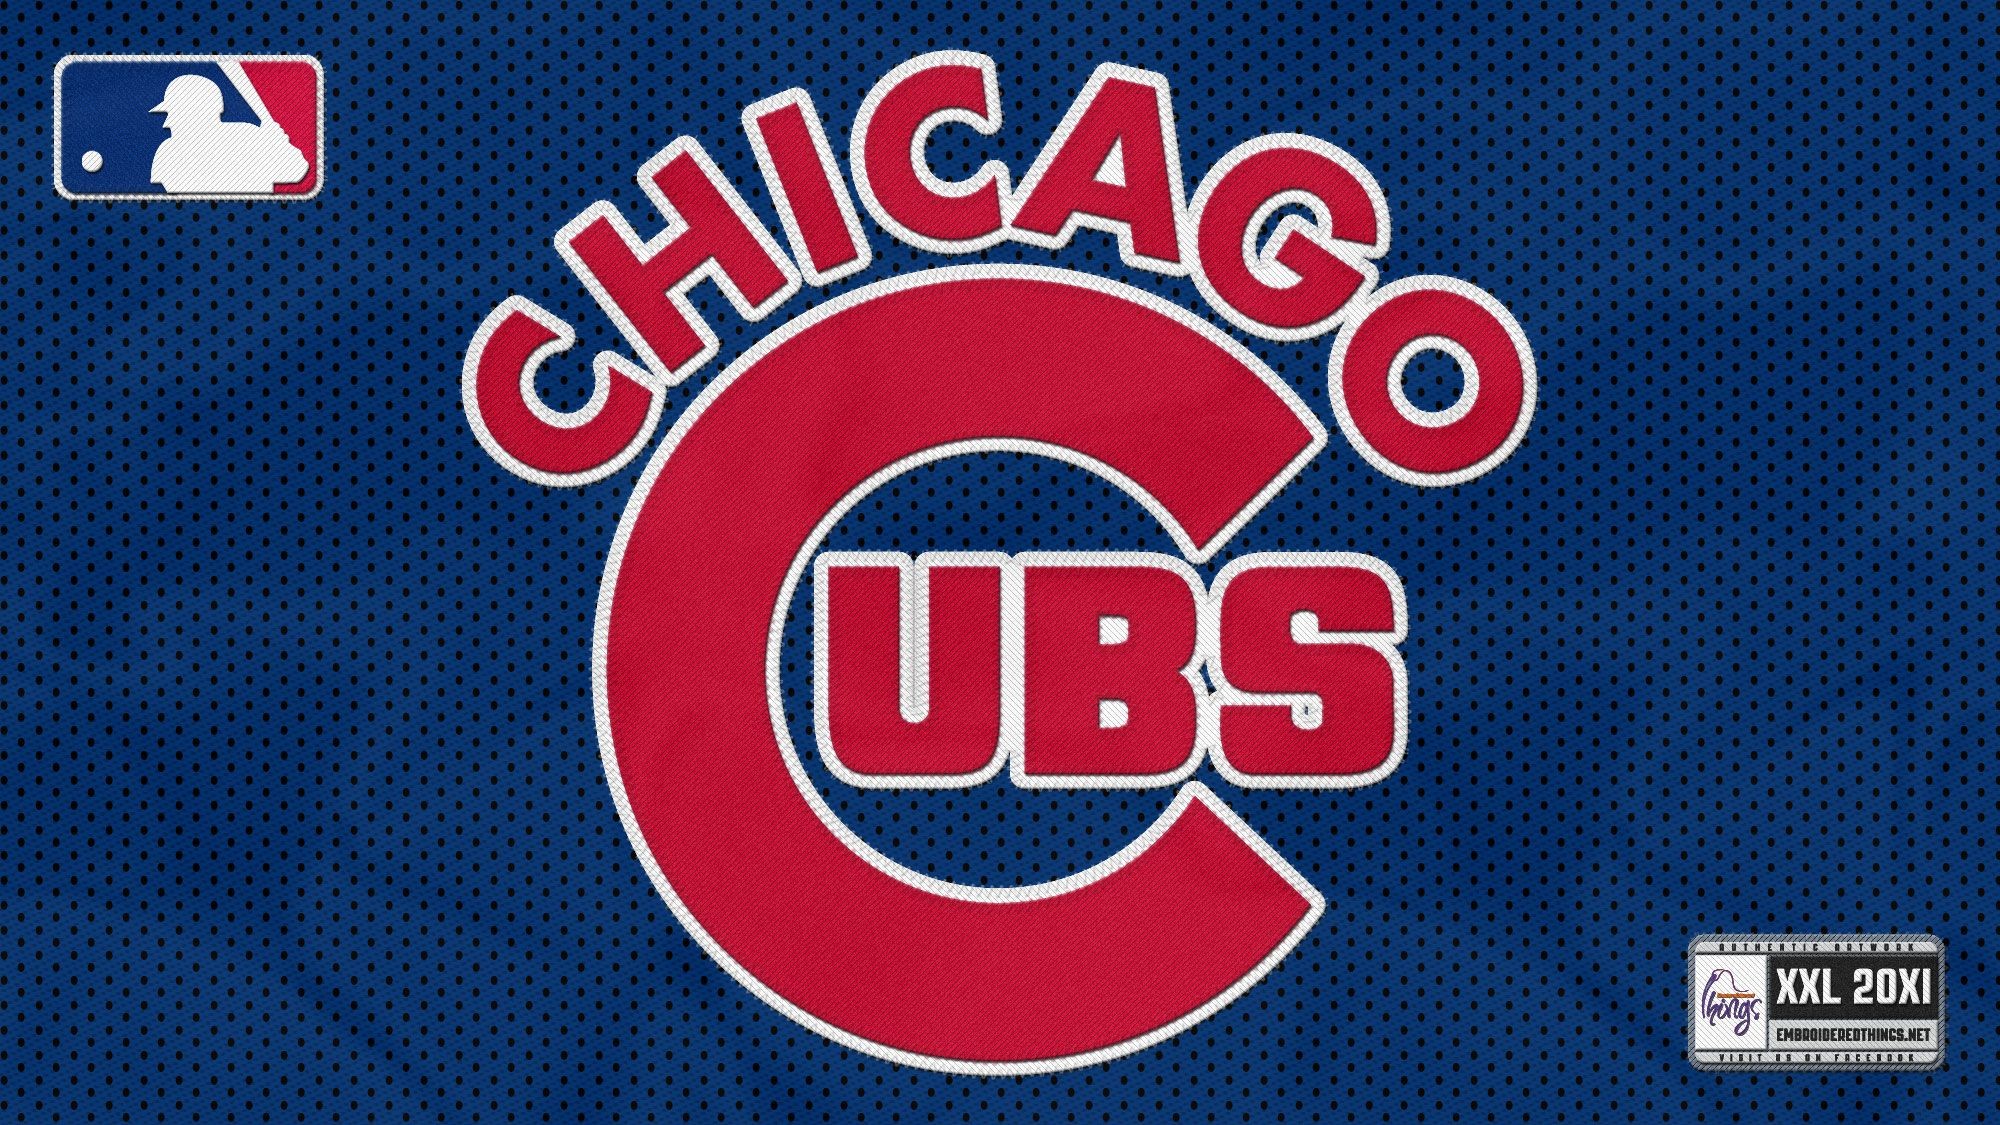 2000x1125 The 25+ best Cubs wallpaper ideas on Pinterest | Iphone 6 photography, Hd  iphone 6 wallpapers and Tiger wallpaper iphone